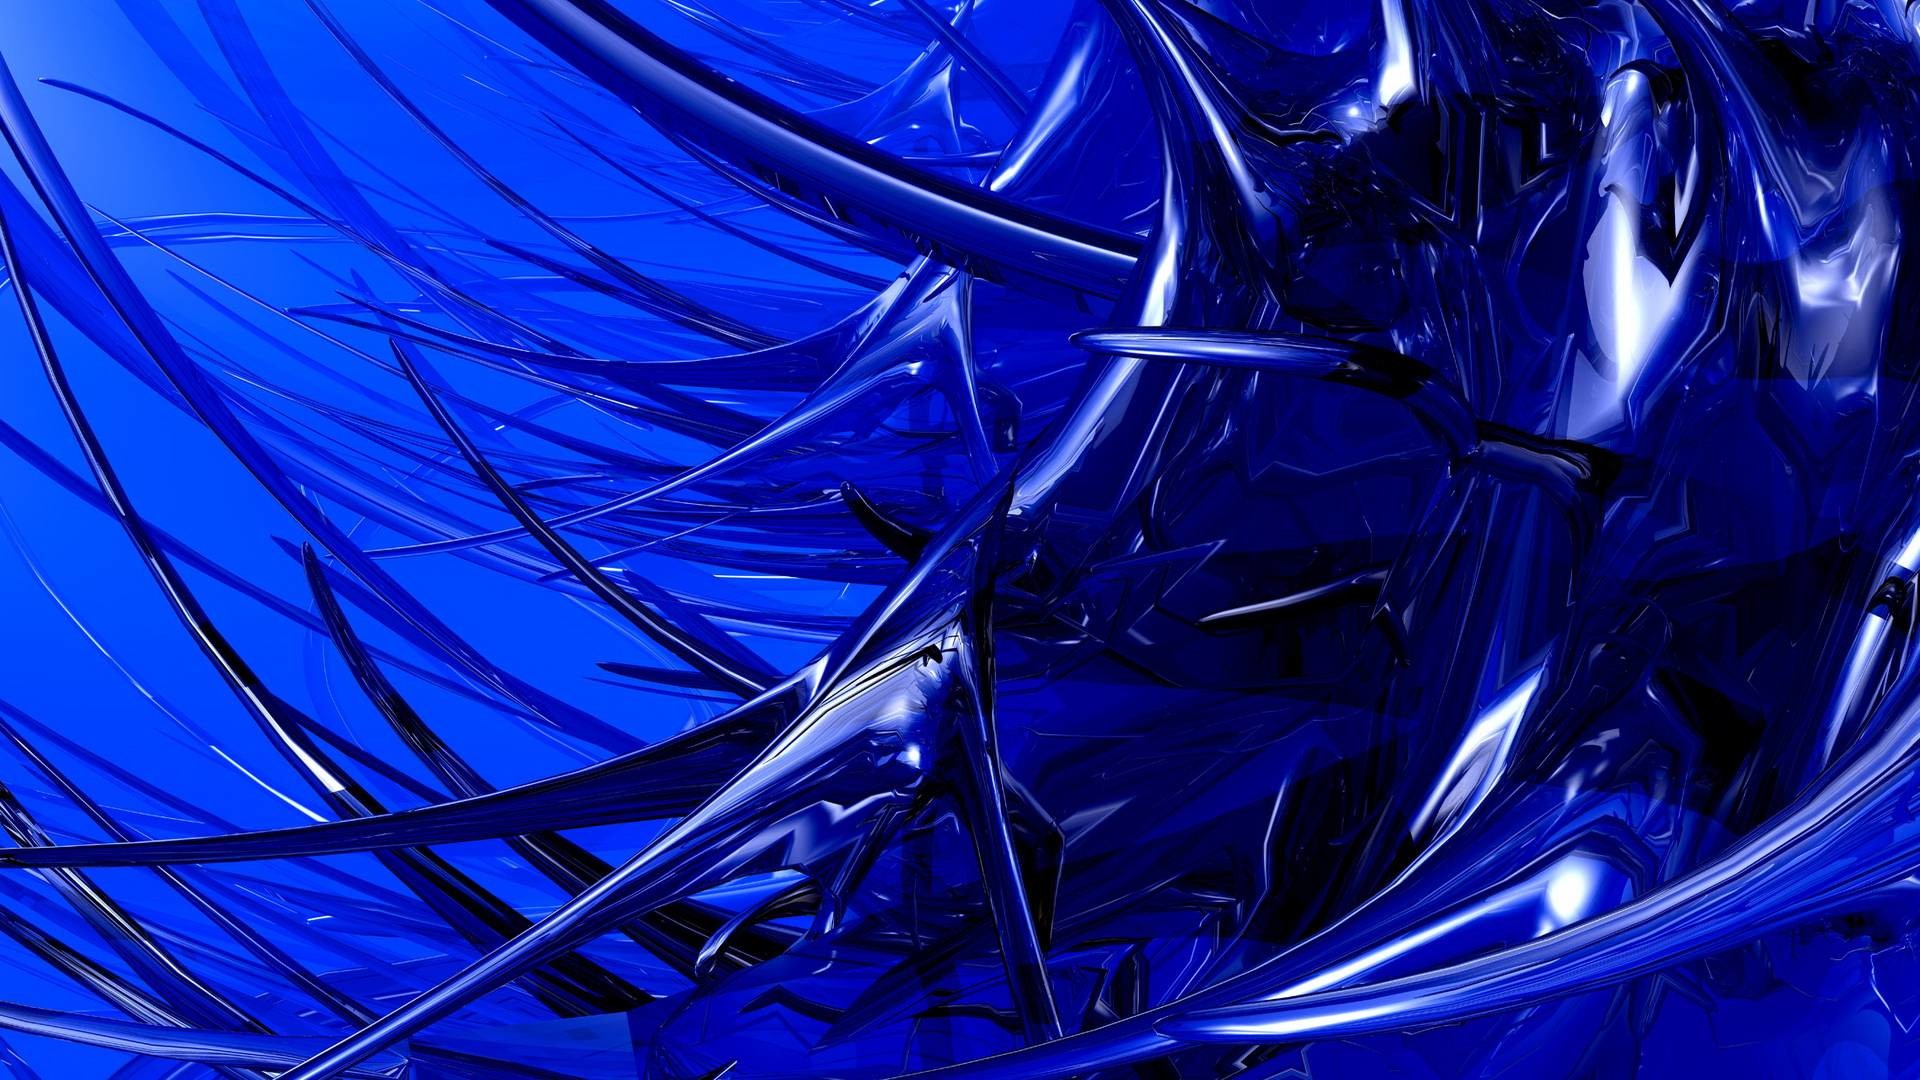 1920x1080 Wallpapers For > Navy Blue Abstract Wallpaper